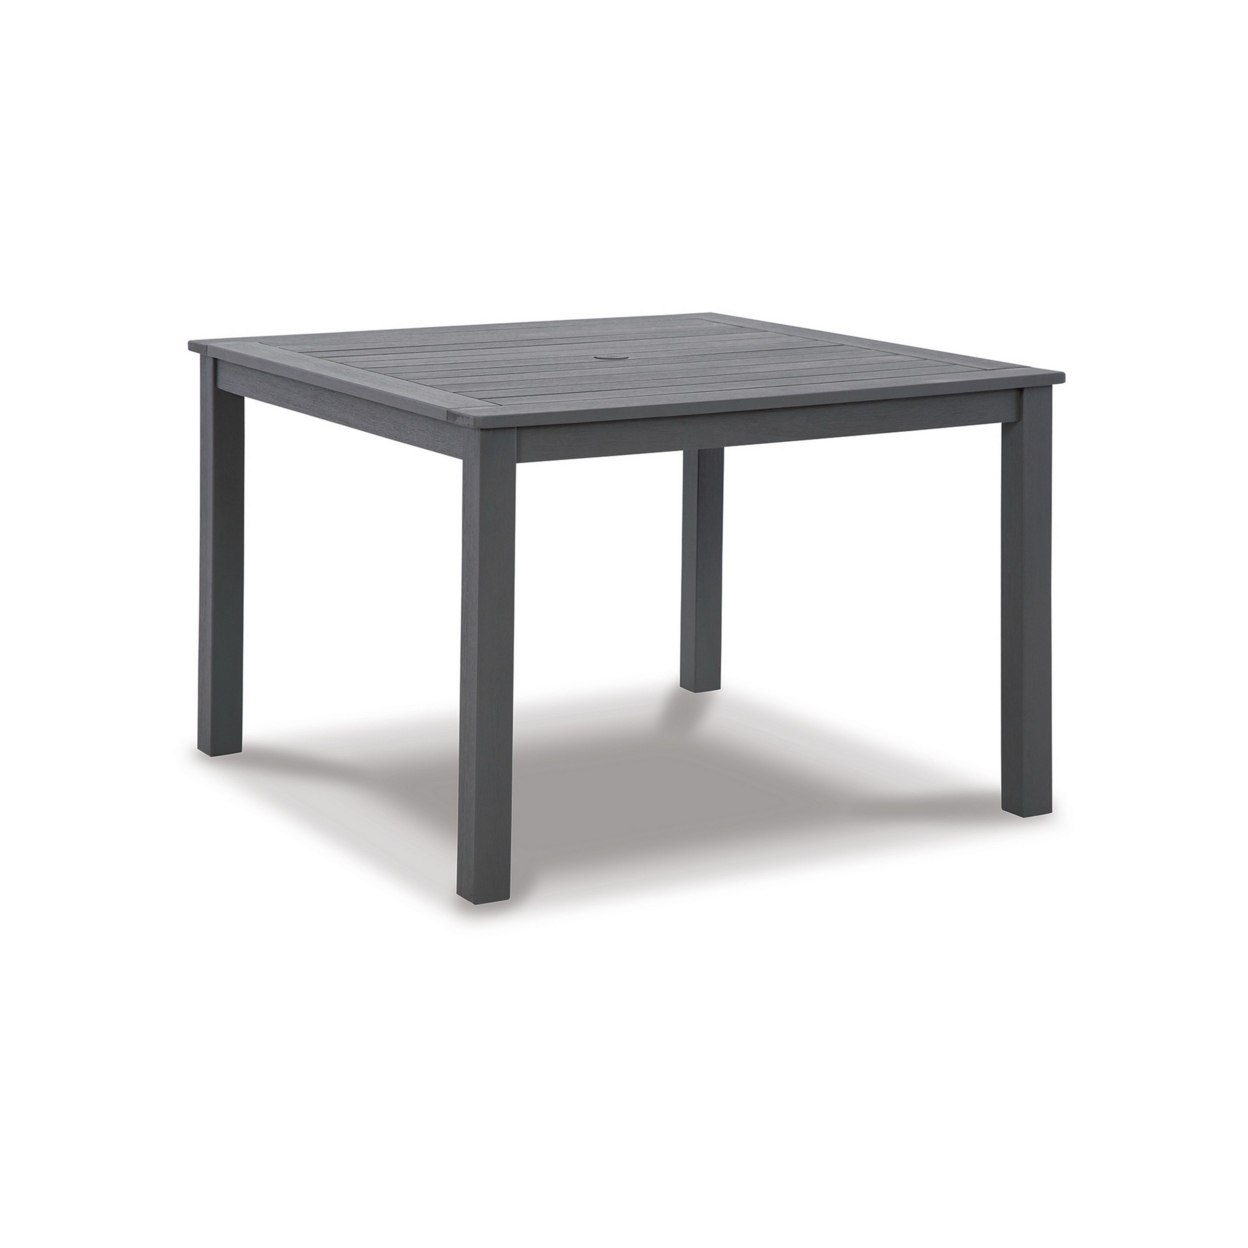 42 Inch Outdoor Square Dining Table, Planked Top, Gray Wood, Straight Legs